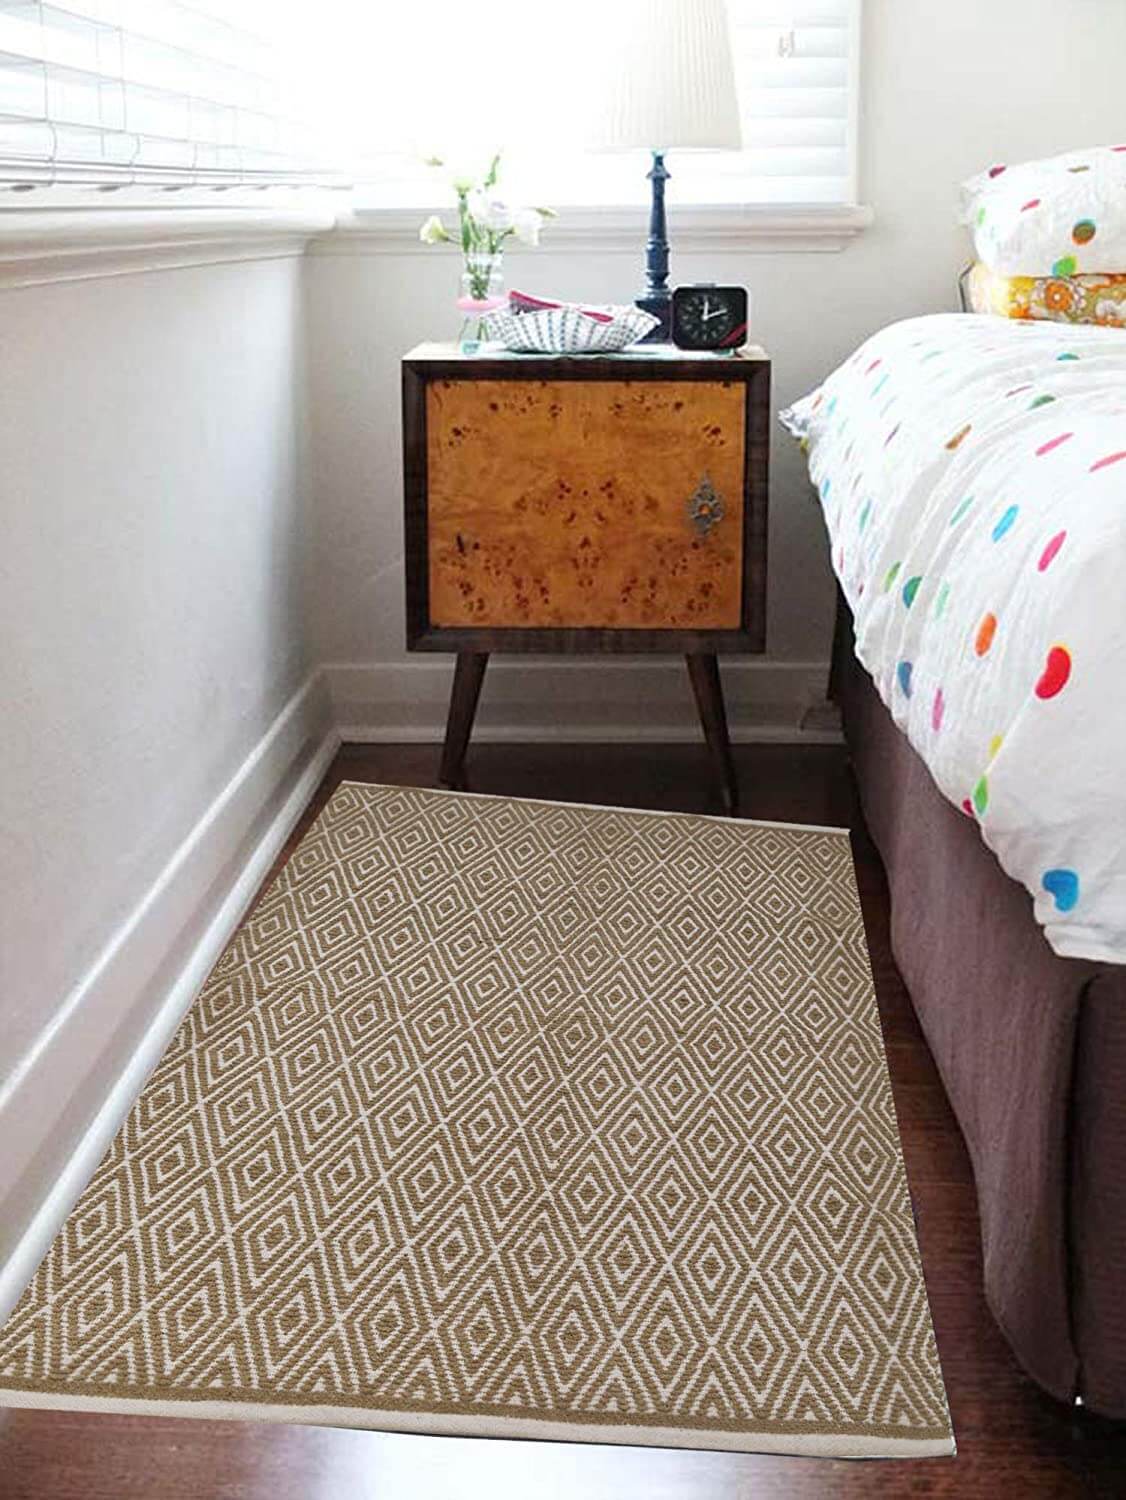 Top 5 Best Rug With Pets {New Review 2020}